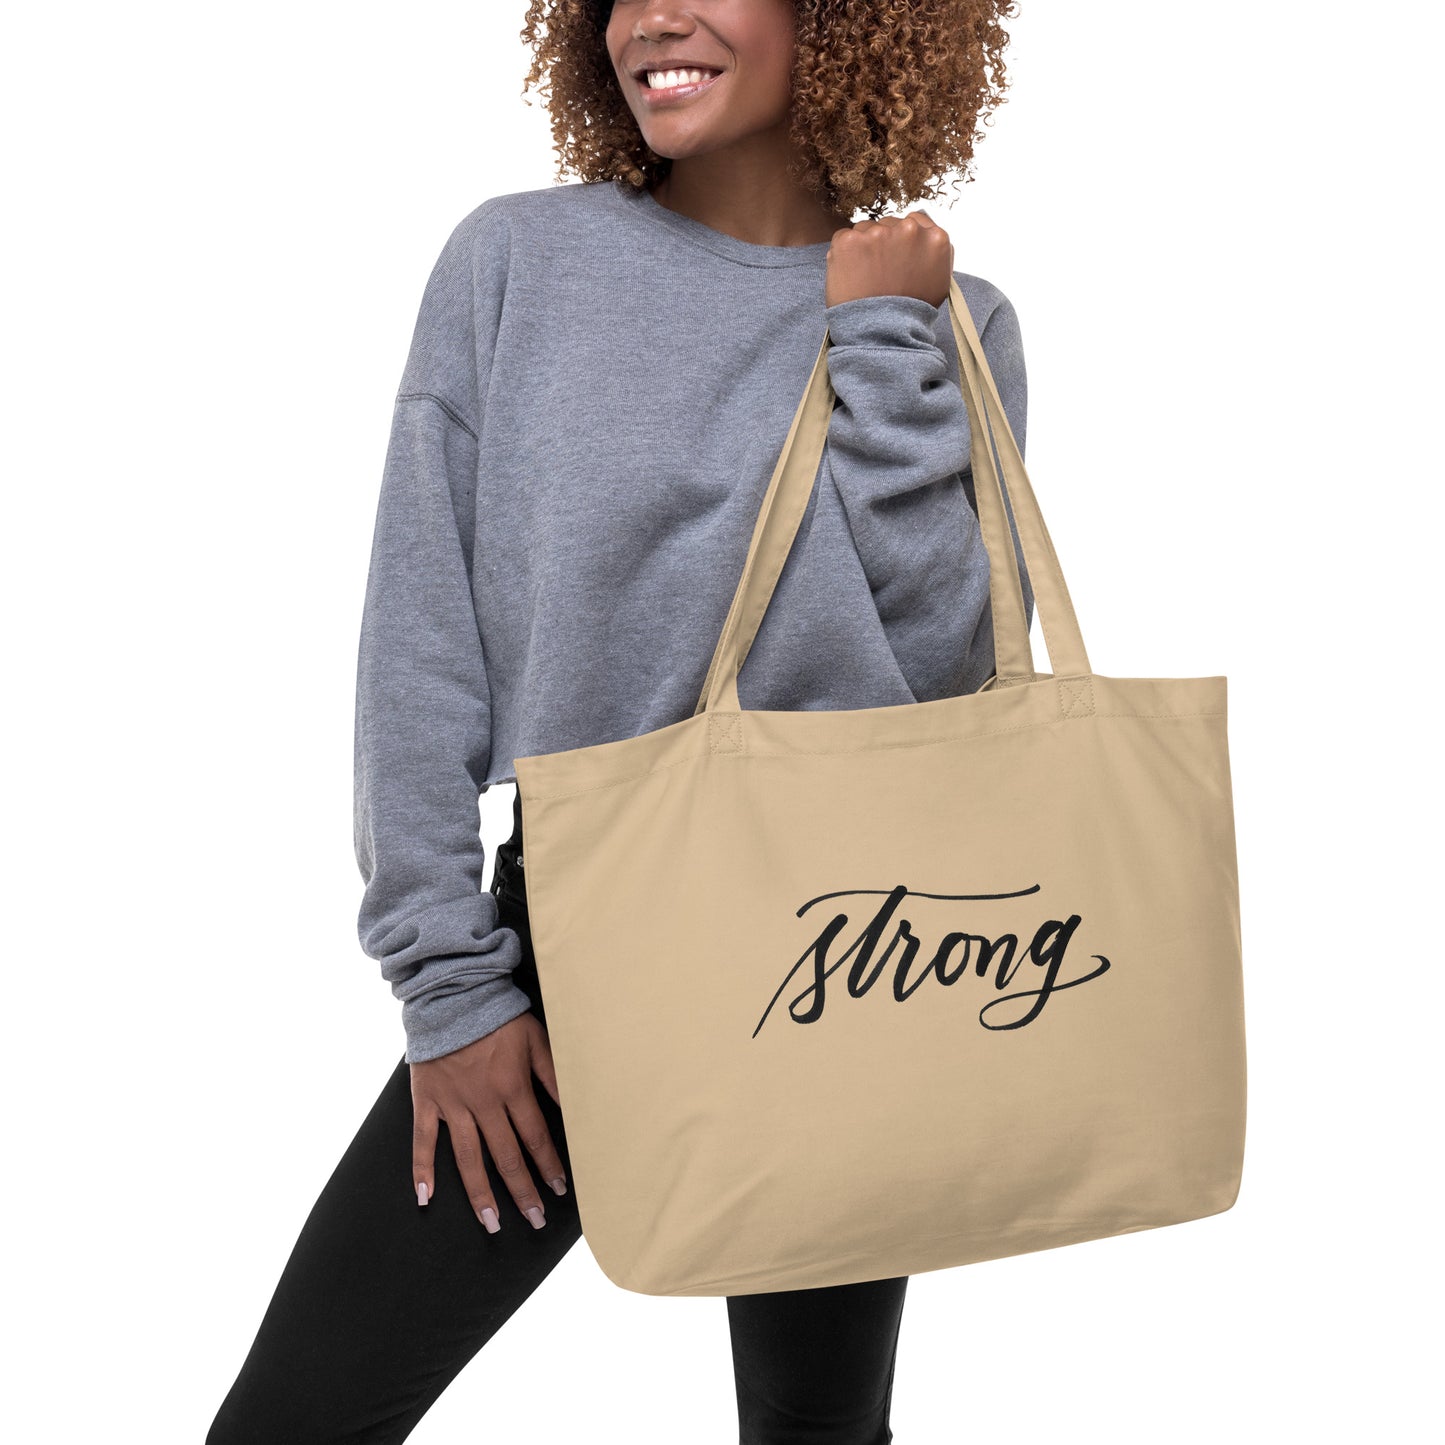 Script "Strong" Calligraphy Printed on Certified Organic Cotton Canvas Large Eco Tote Bag